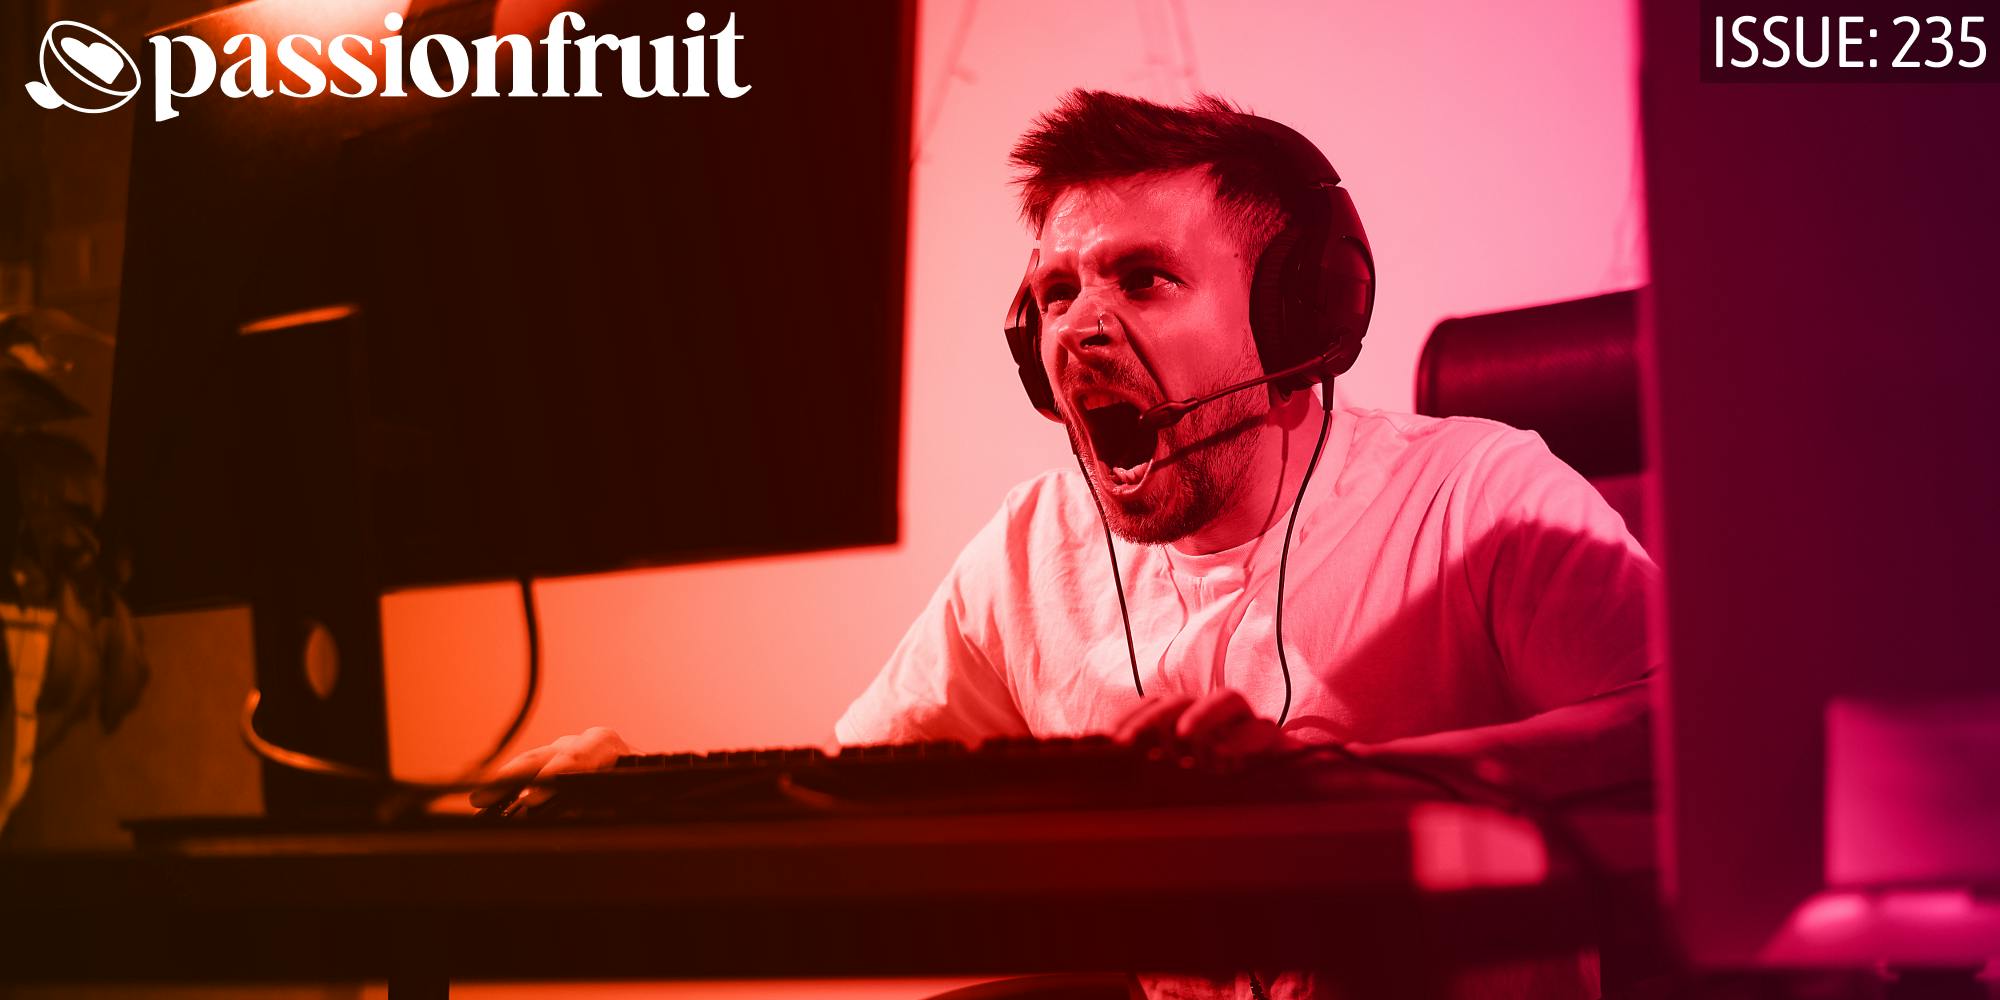 gamer sitting at computer screaming with rage next to a passionfruit logo and text that reads issue 235